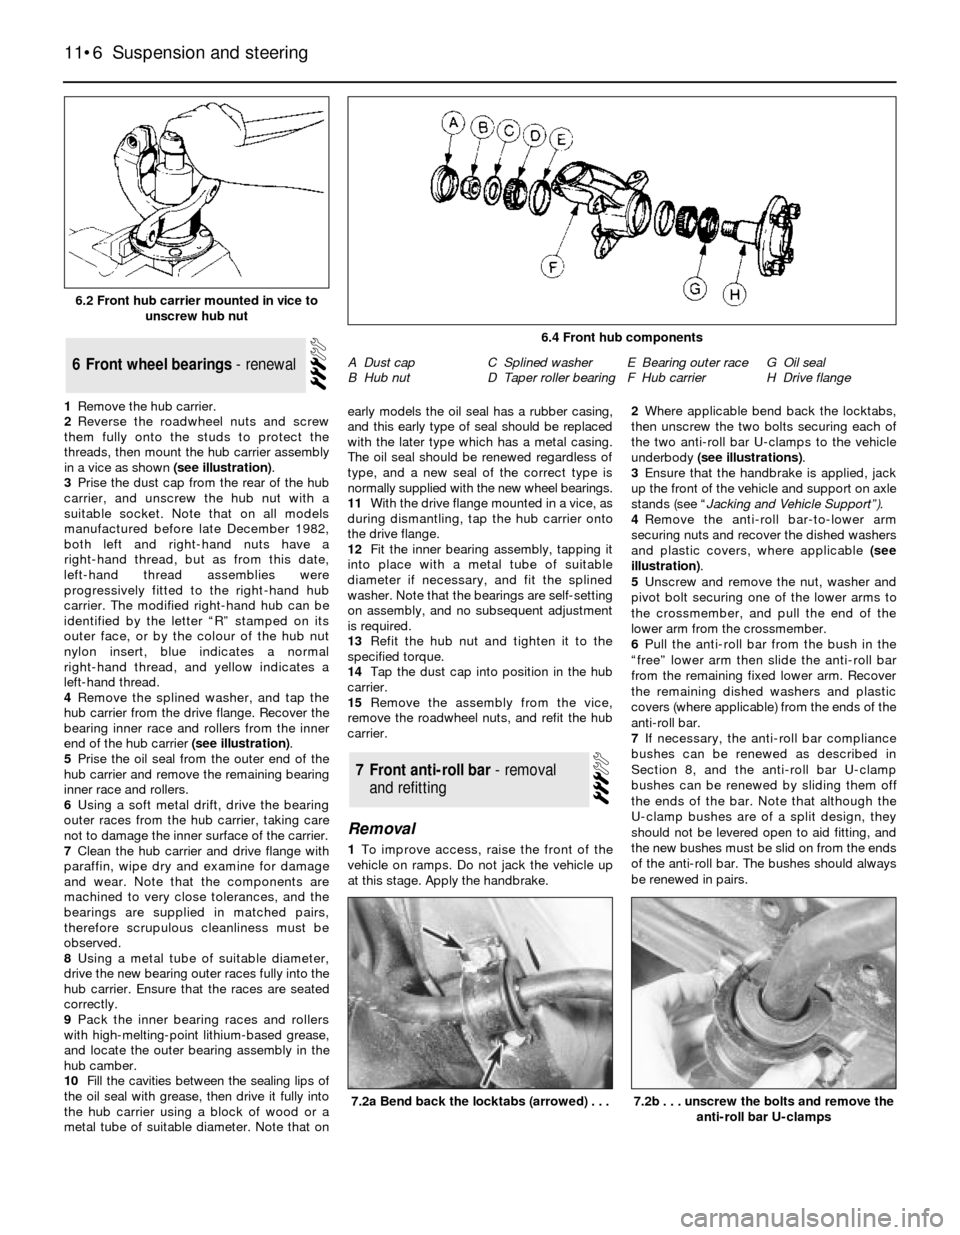 FORD SIERRA 1988 2.G Suspension And Steering Workshop Manual 1Remove the hub carrier.
2Reverse the roadwheel nuts and screw
them fully onto the studs to protect the
threads, then mount the hub carrier assembly
in a vice as shown (see illustration).
3Prise the d